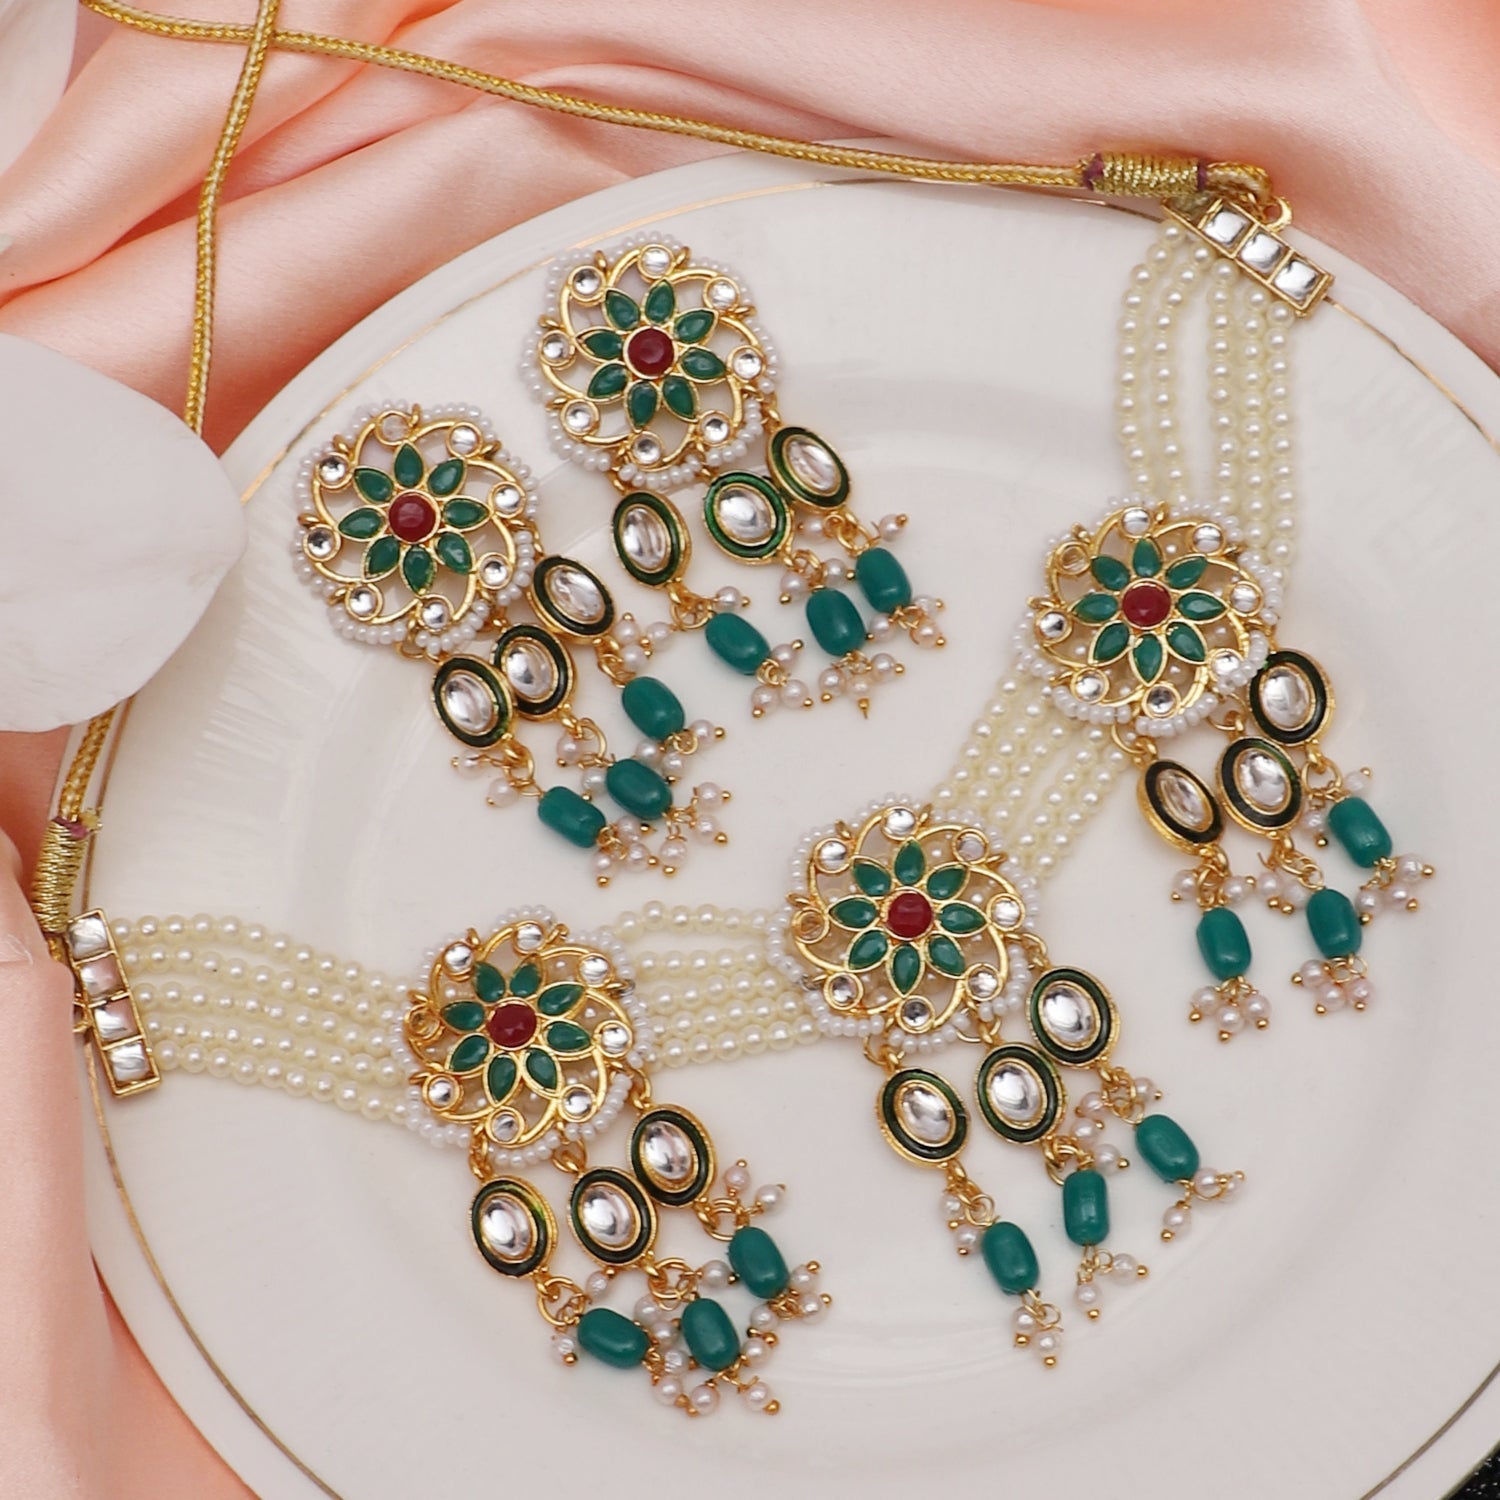 Bhagya Lakshmi Multi-Color Pearl Necklace with Matching Earrings